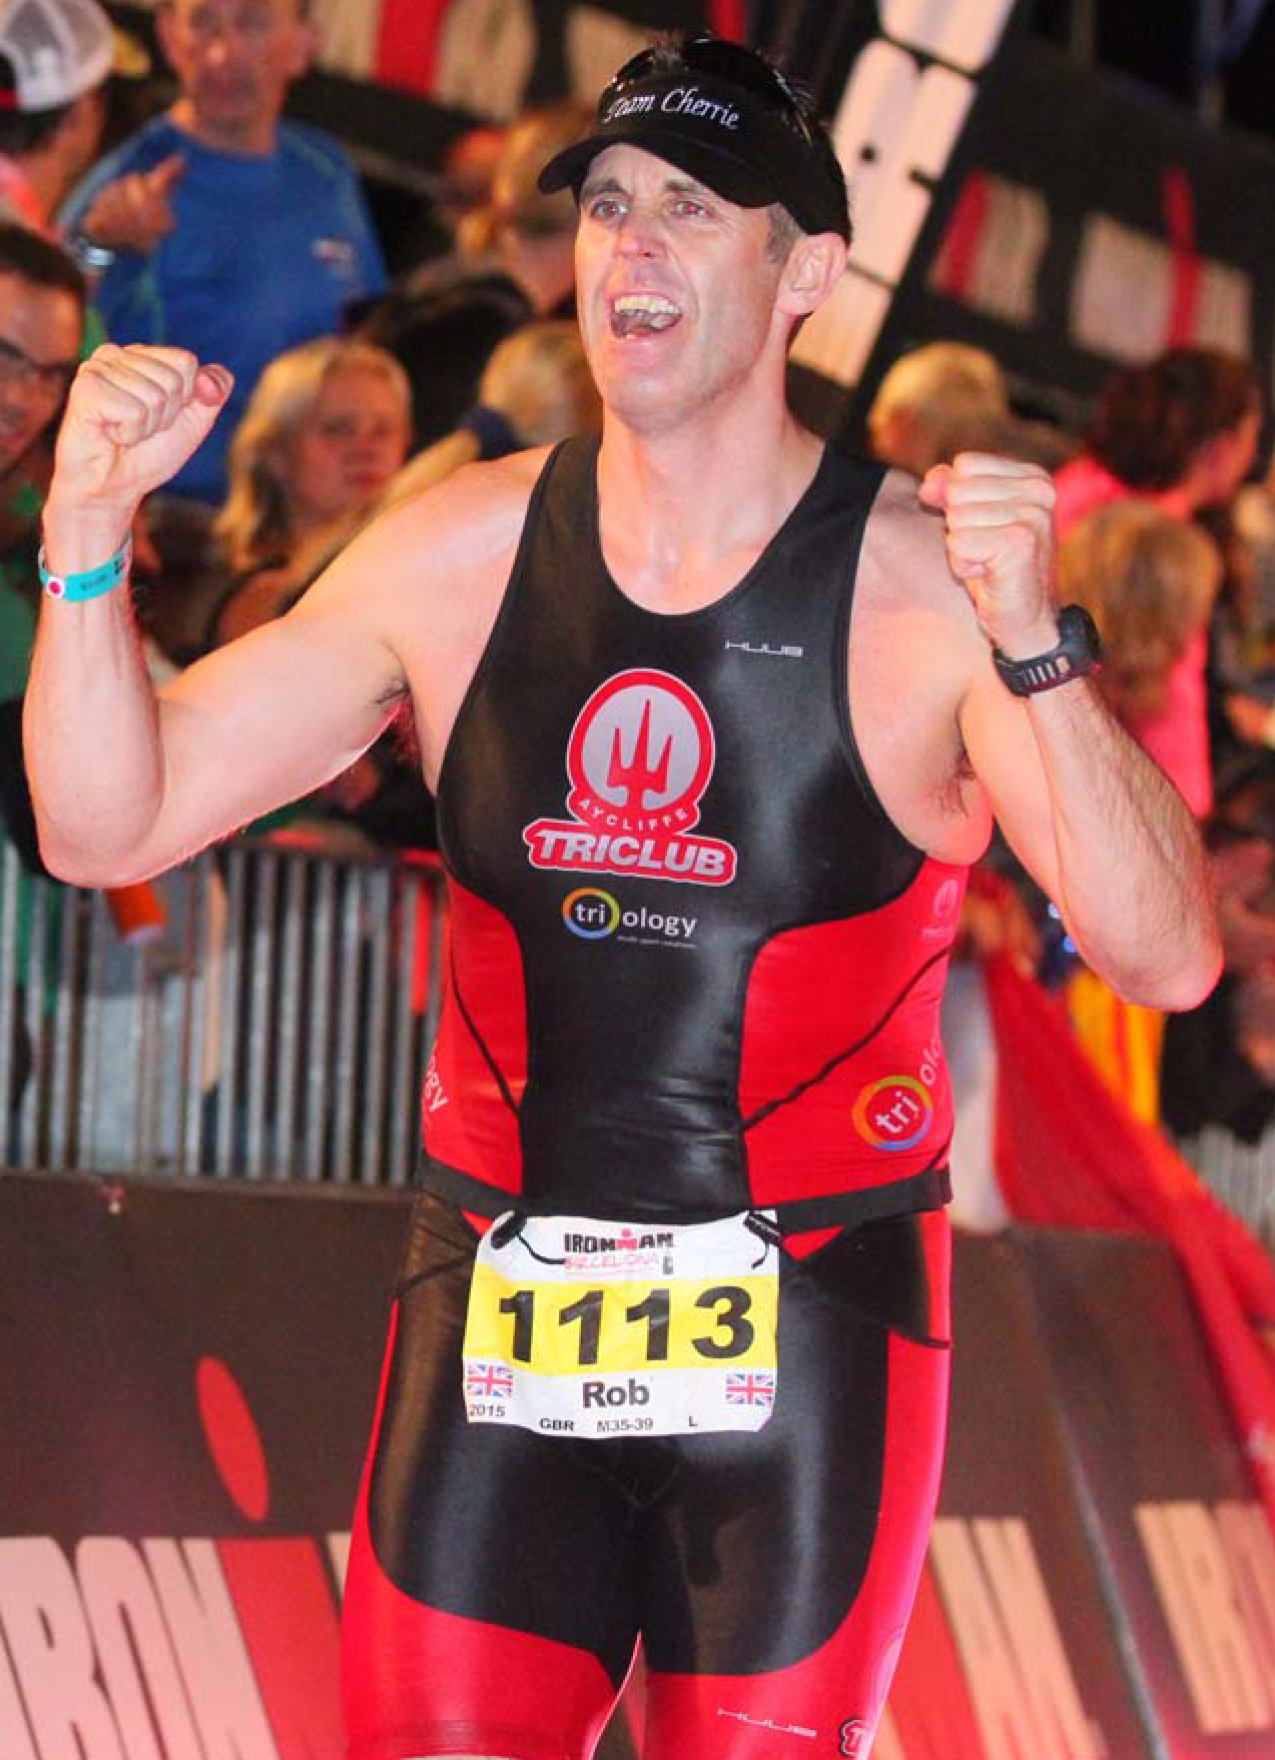 Ironman Number 5 for Aycliffe Tri Club